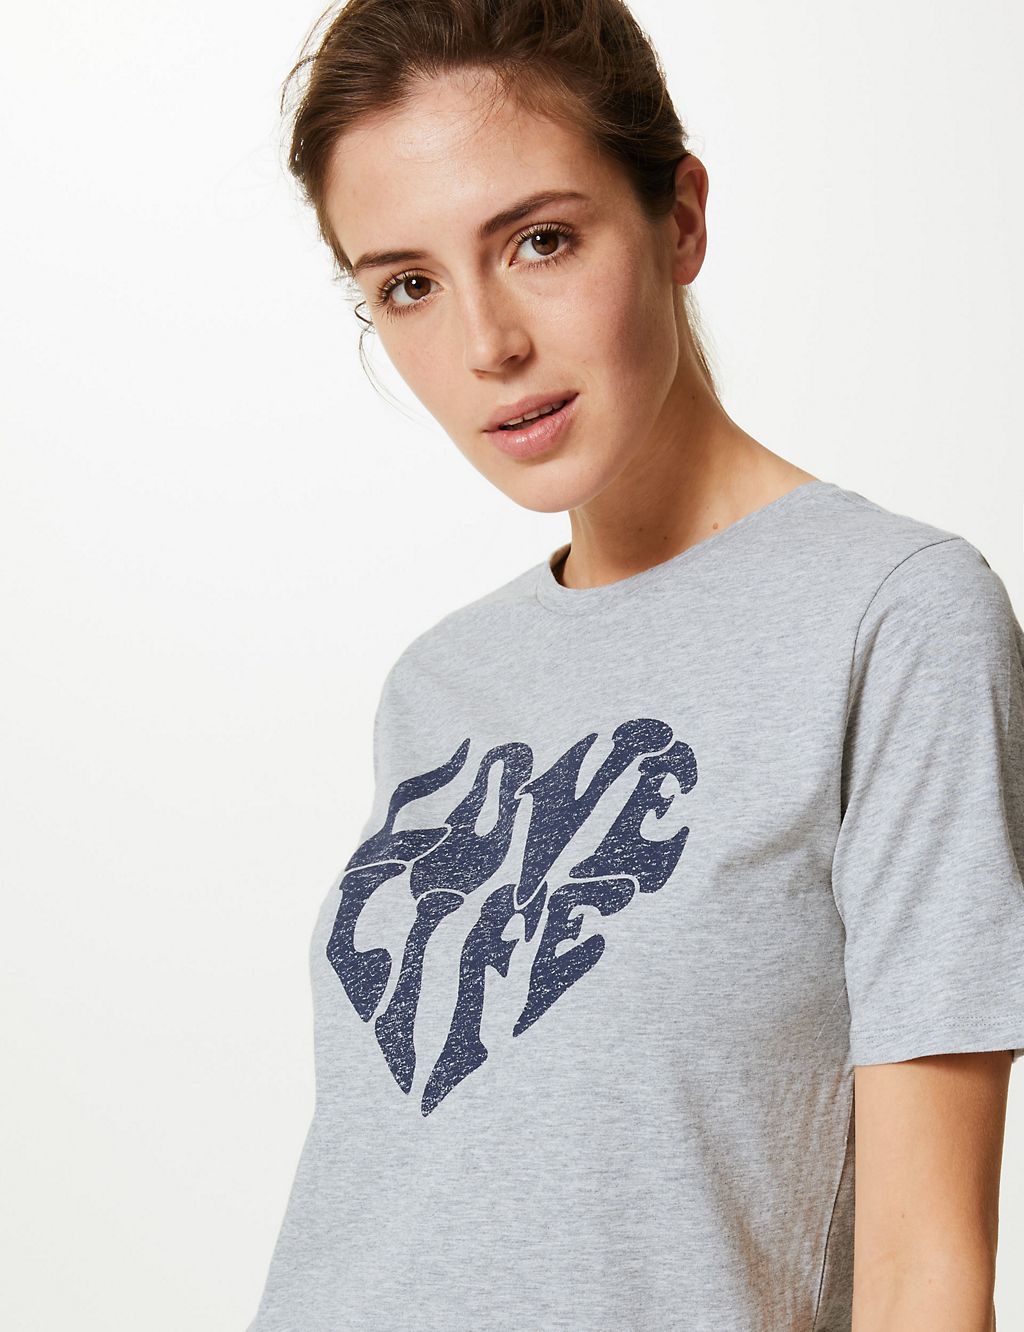 Pure Cotton Love Life Straight Fit T-Shirt 3 of 4